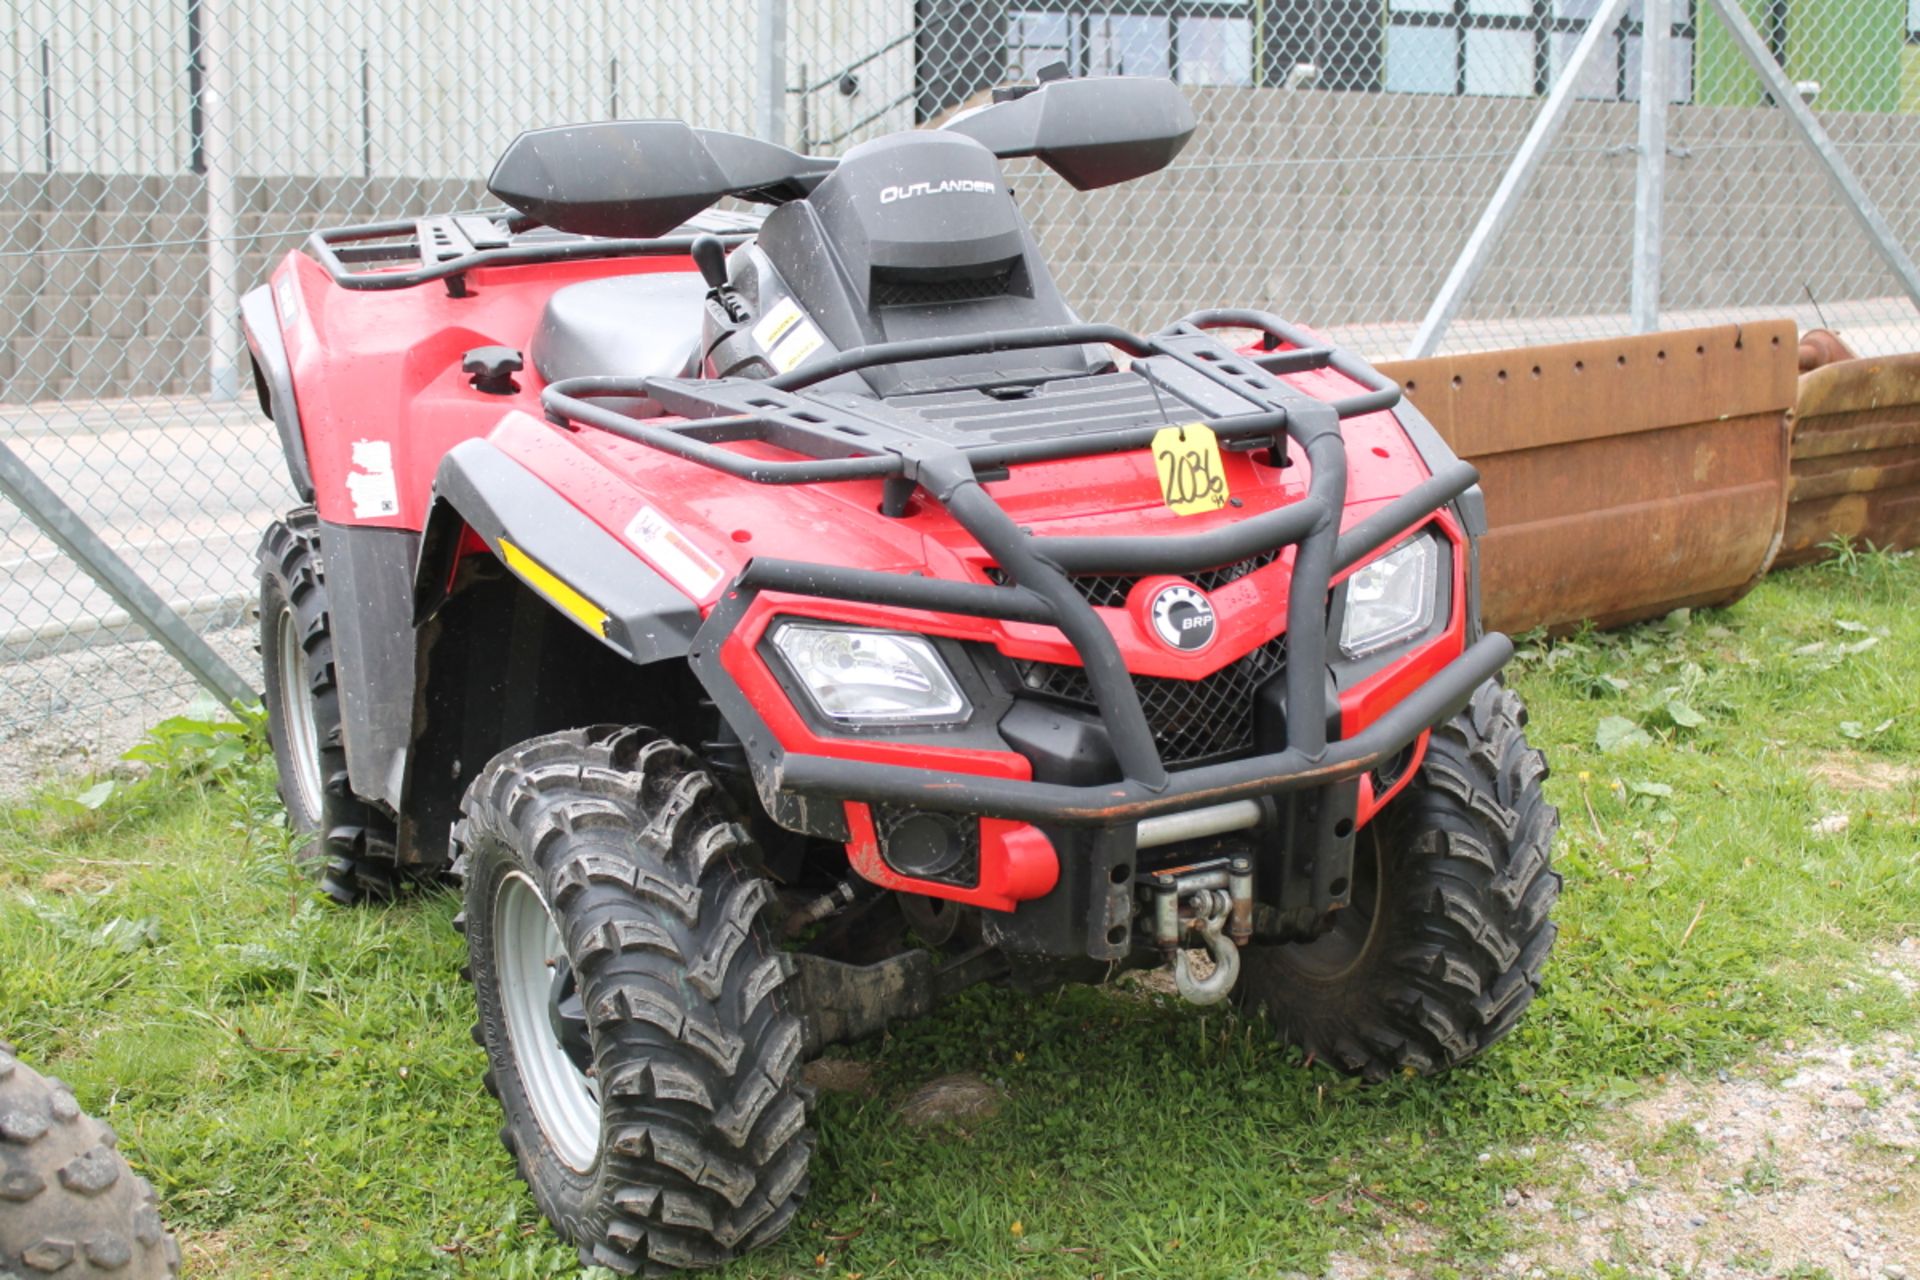 CAN-AM OUTLANDER 500 QUAD 680 HOURS KEY IN P/CABIN